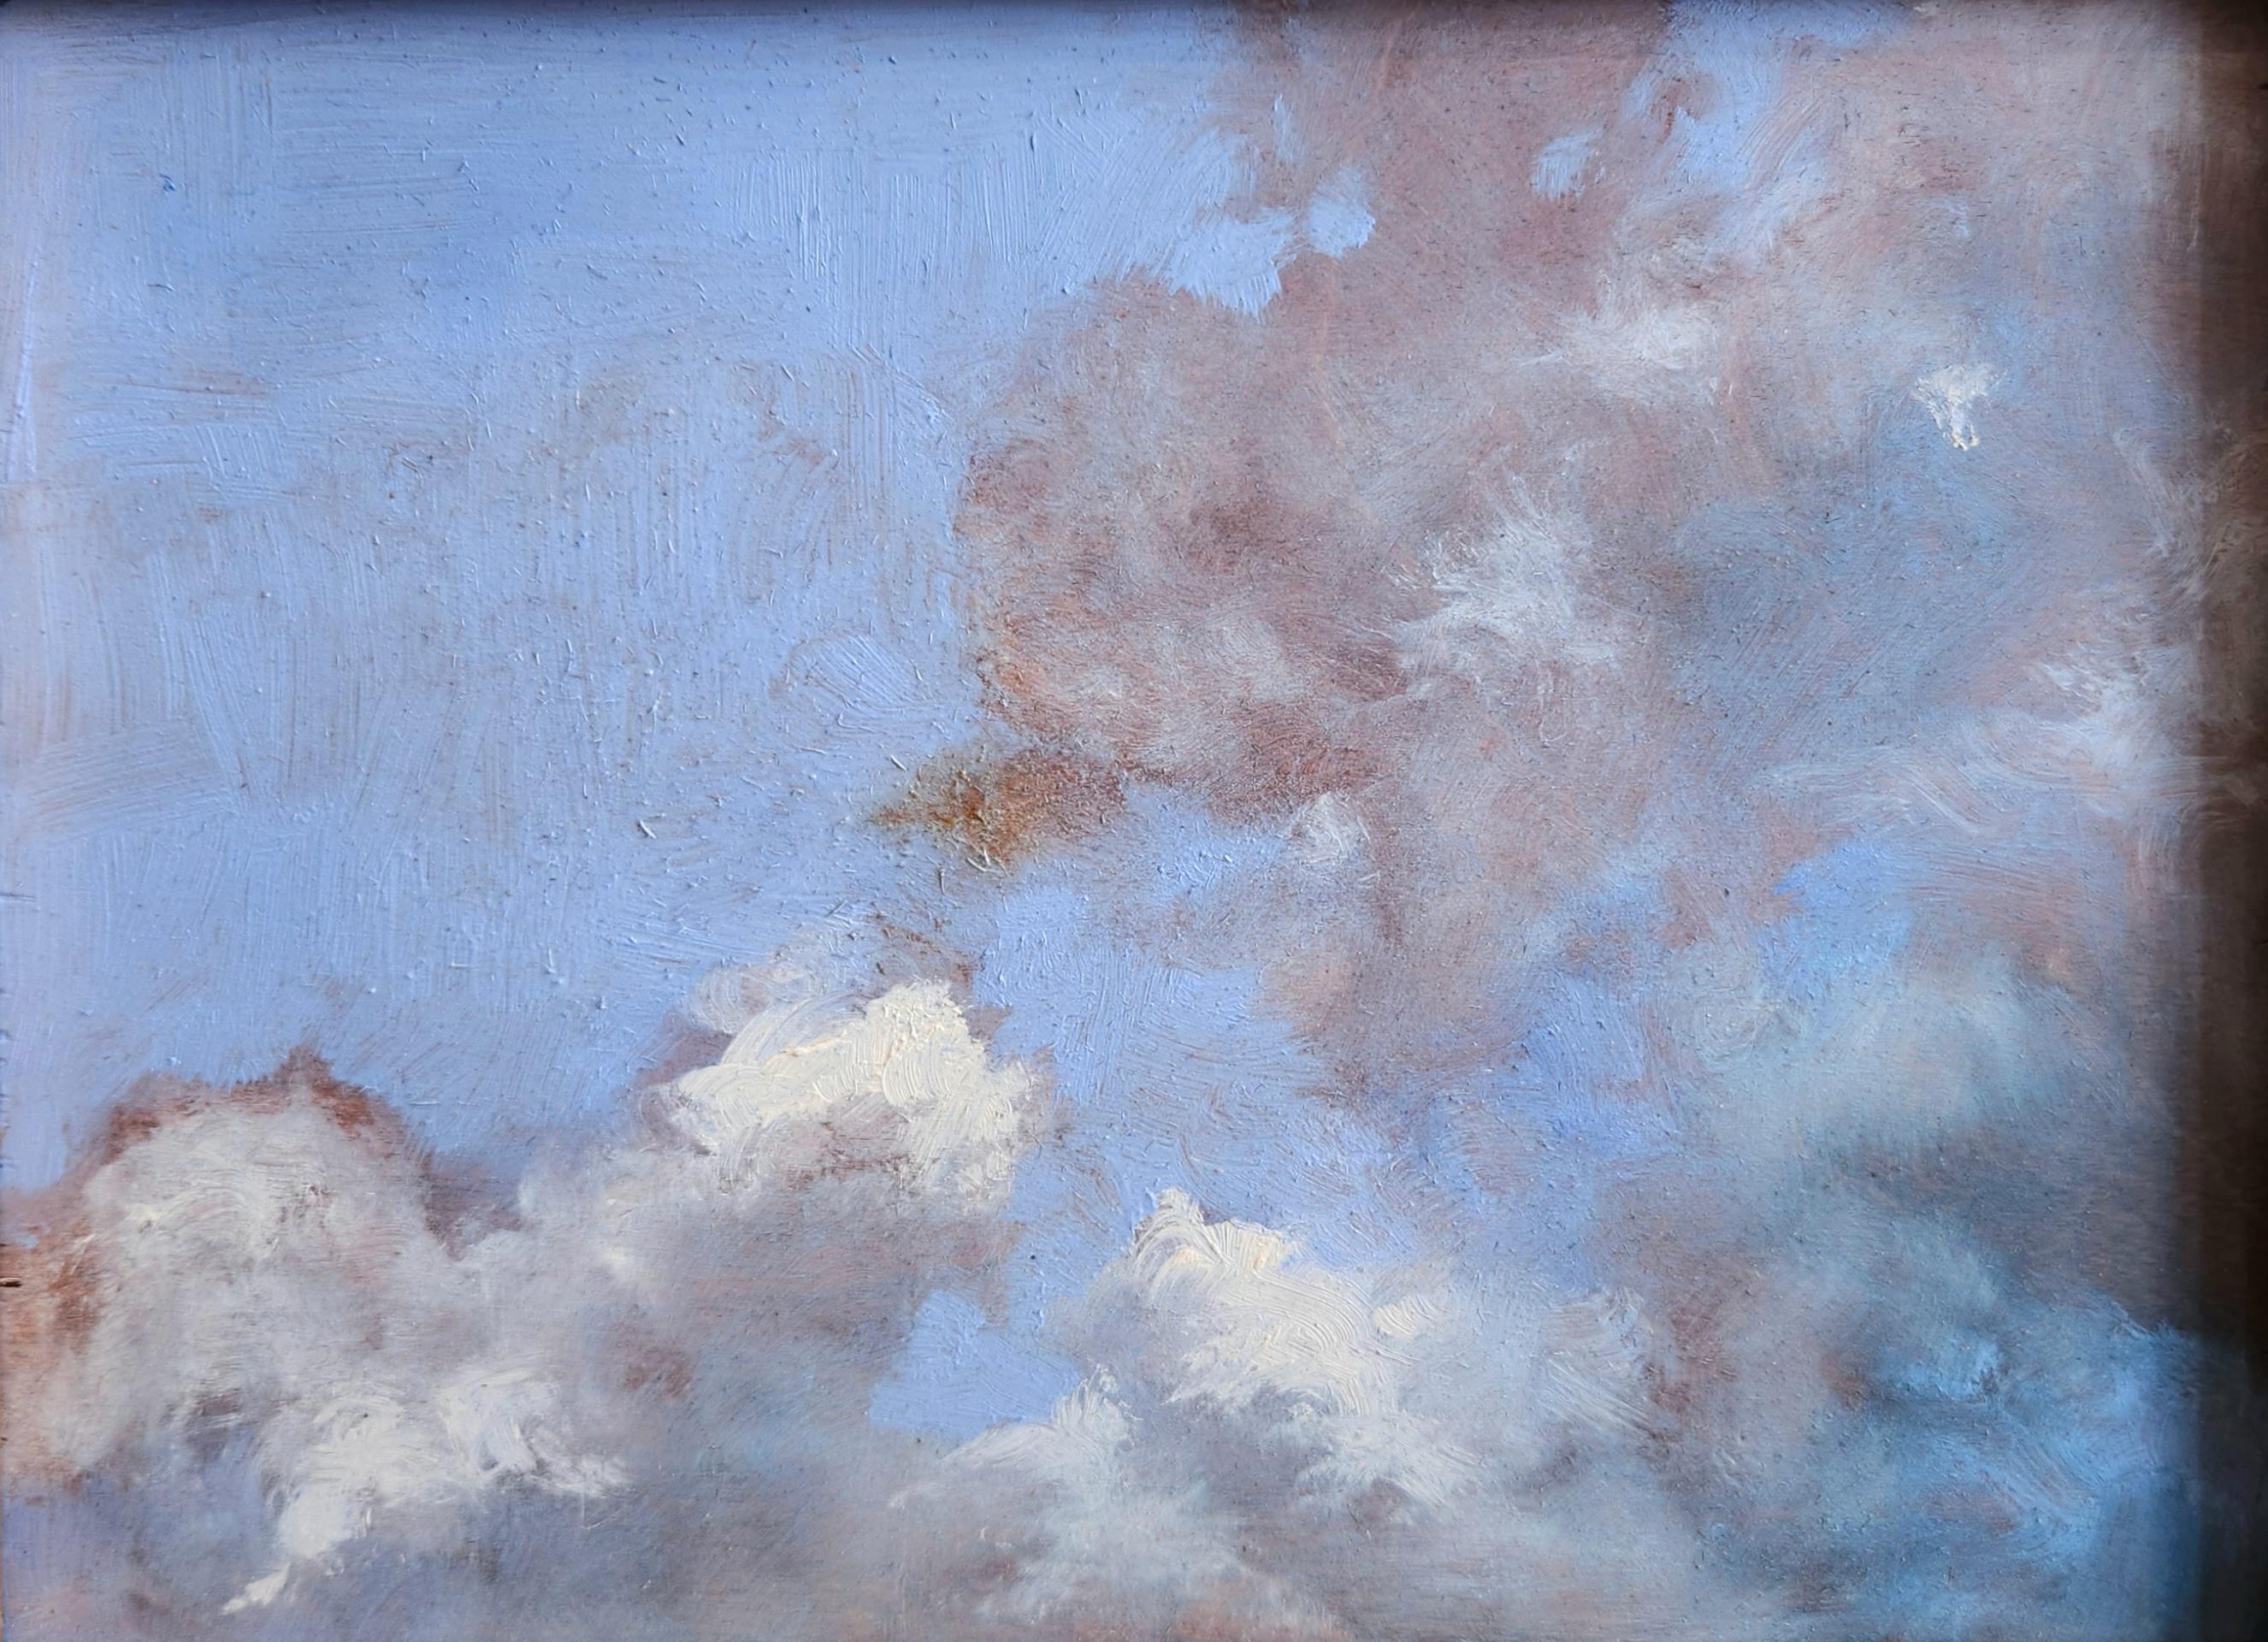 This oil on canvas painting shows a beautiful scene of a summer sky. A bright blue sky sets the background for wonderful clouds that vary from bright white to deep blue and gray. The painting evokes the feeling of a warm and leisurely summer